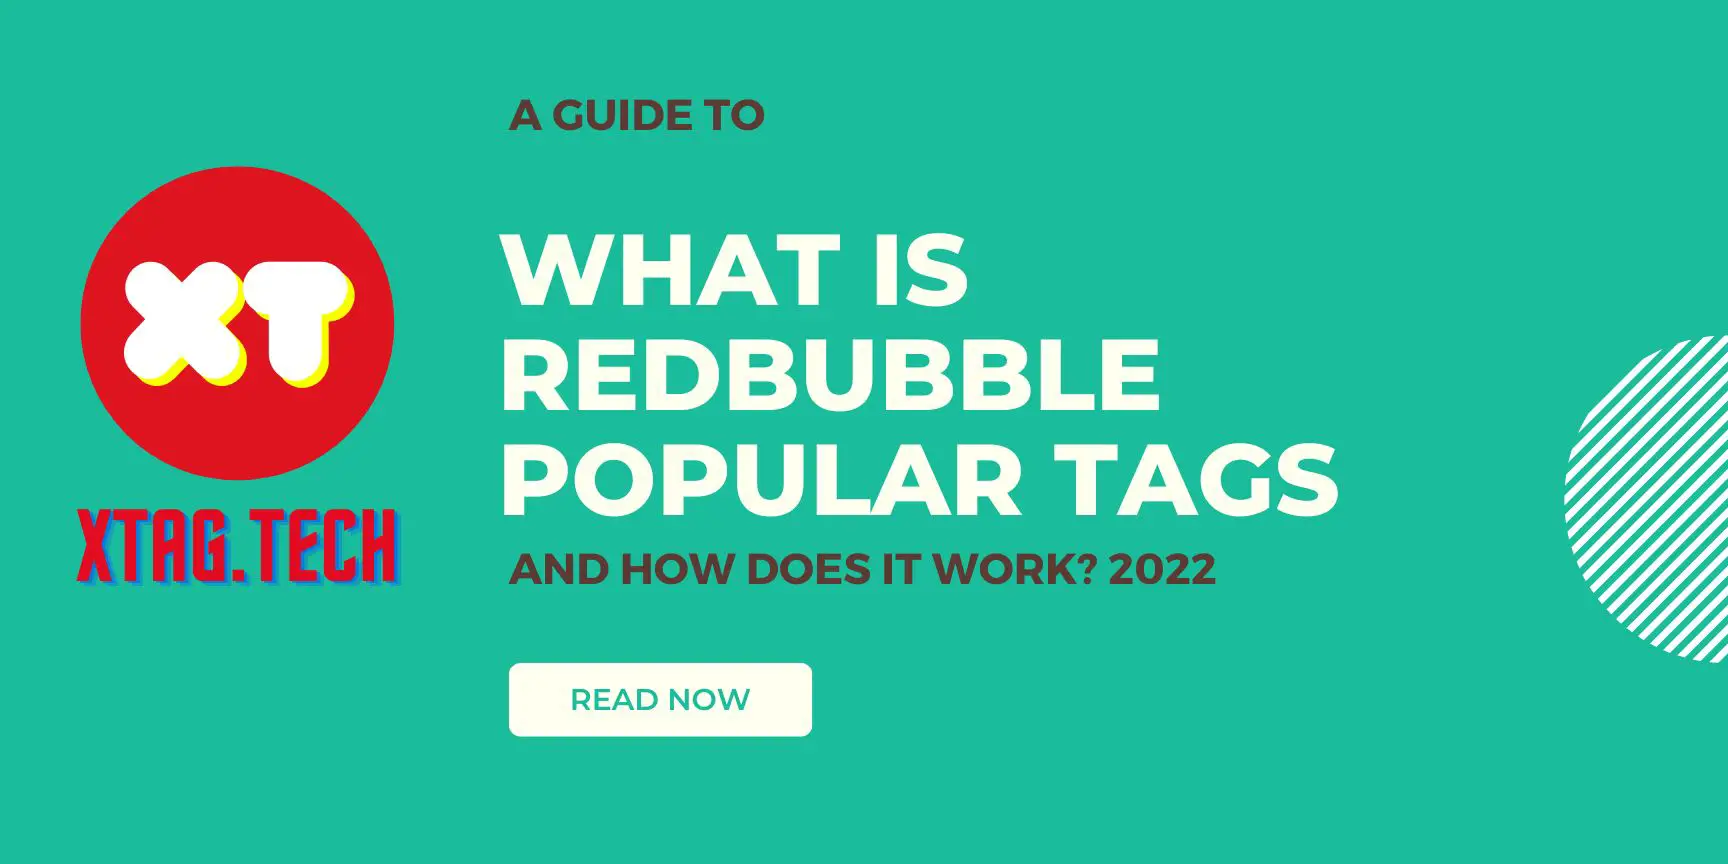 What is RedBubble Popular Tags and how does it work? 2022